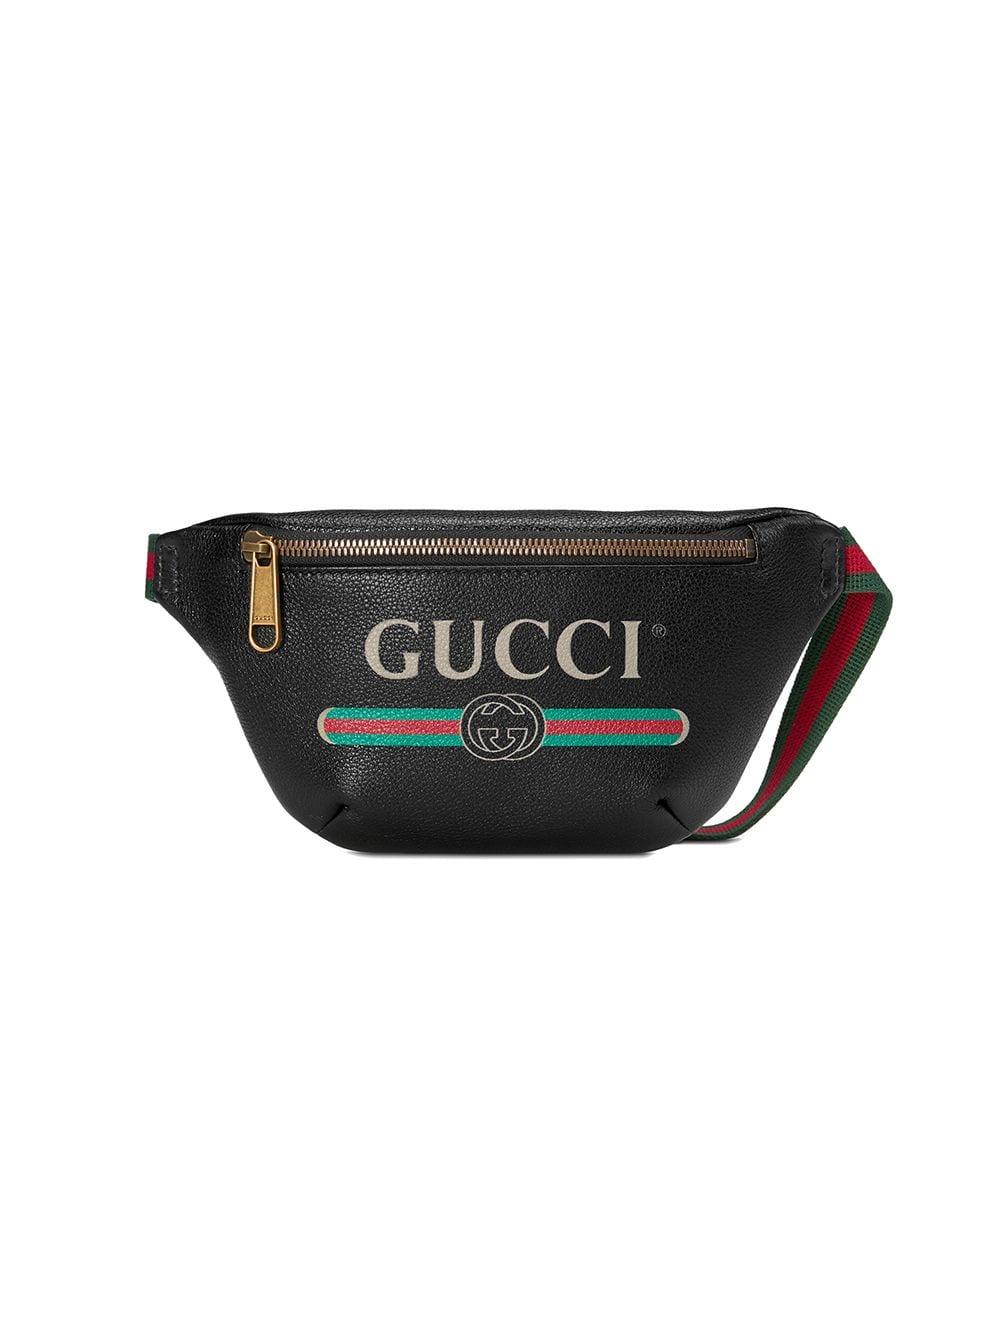 Gucci Leather Print Small Belt Bag in Black Leather (Black) - Save 21% - Lyst